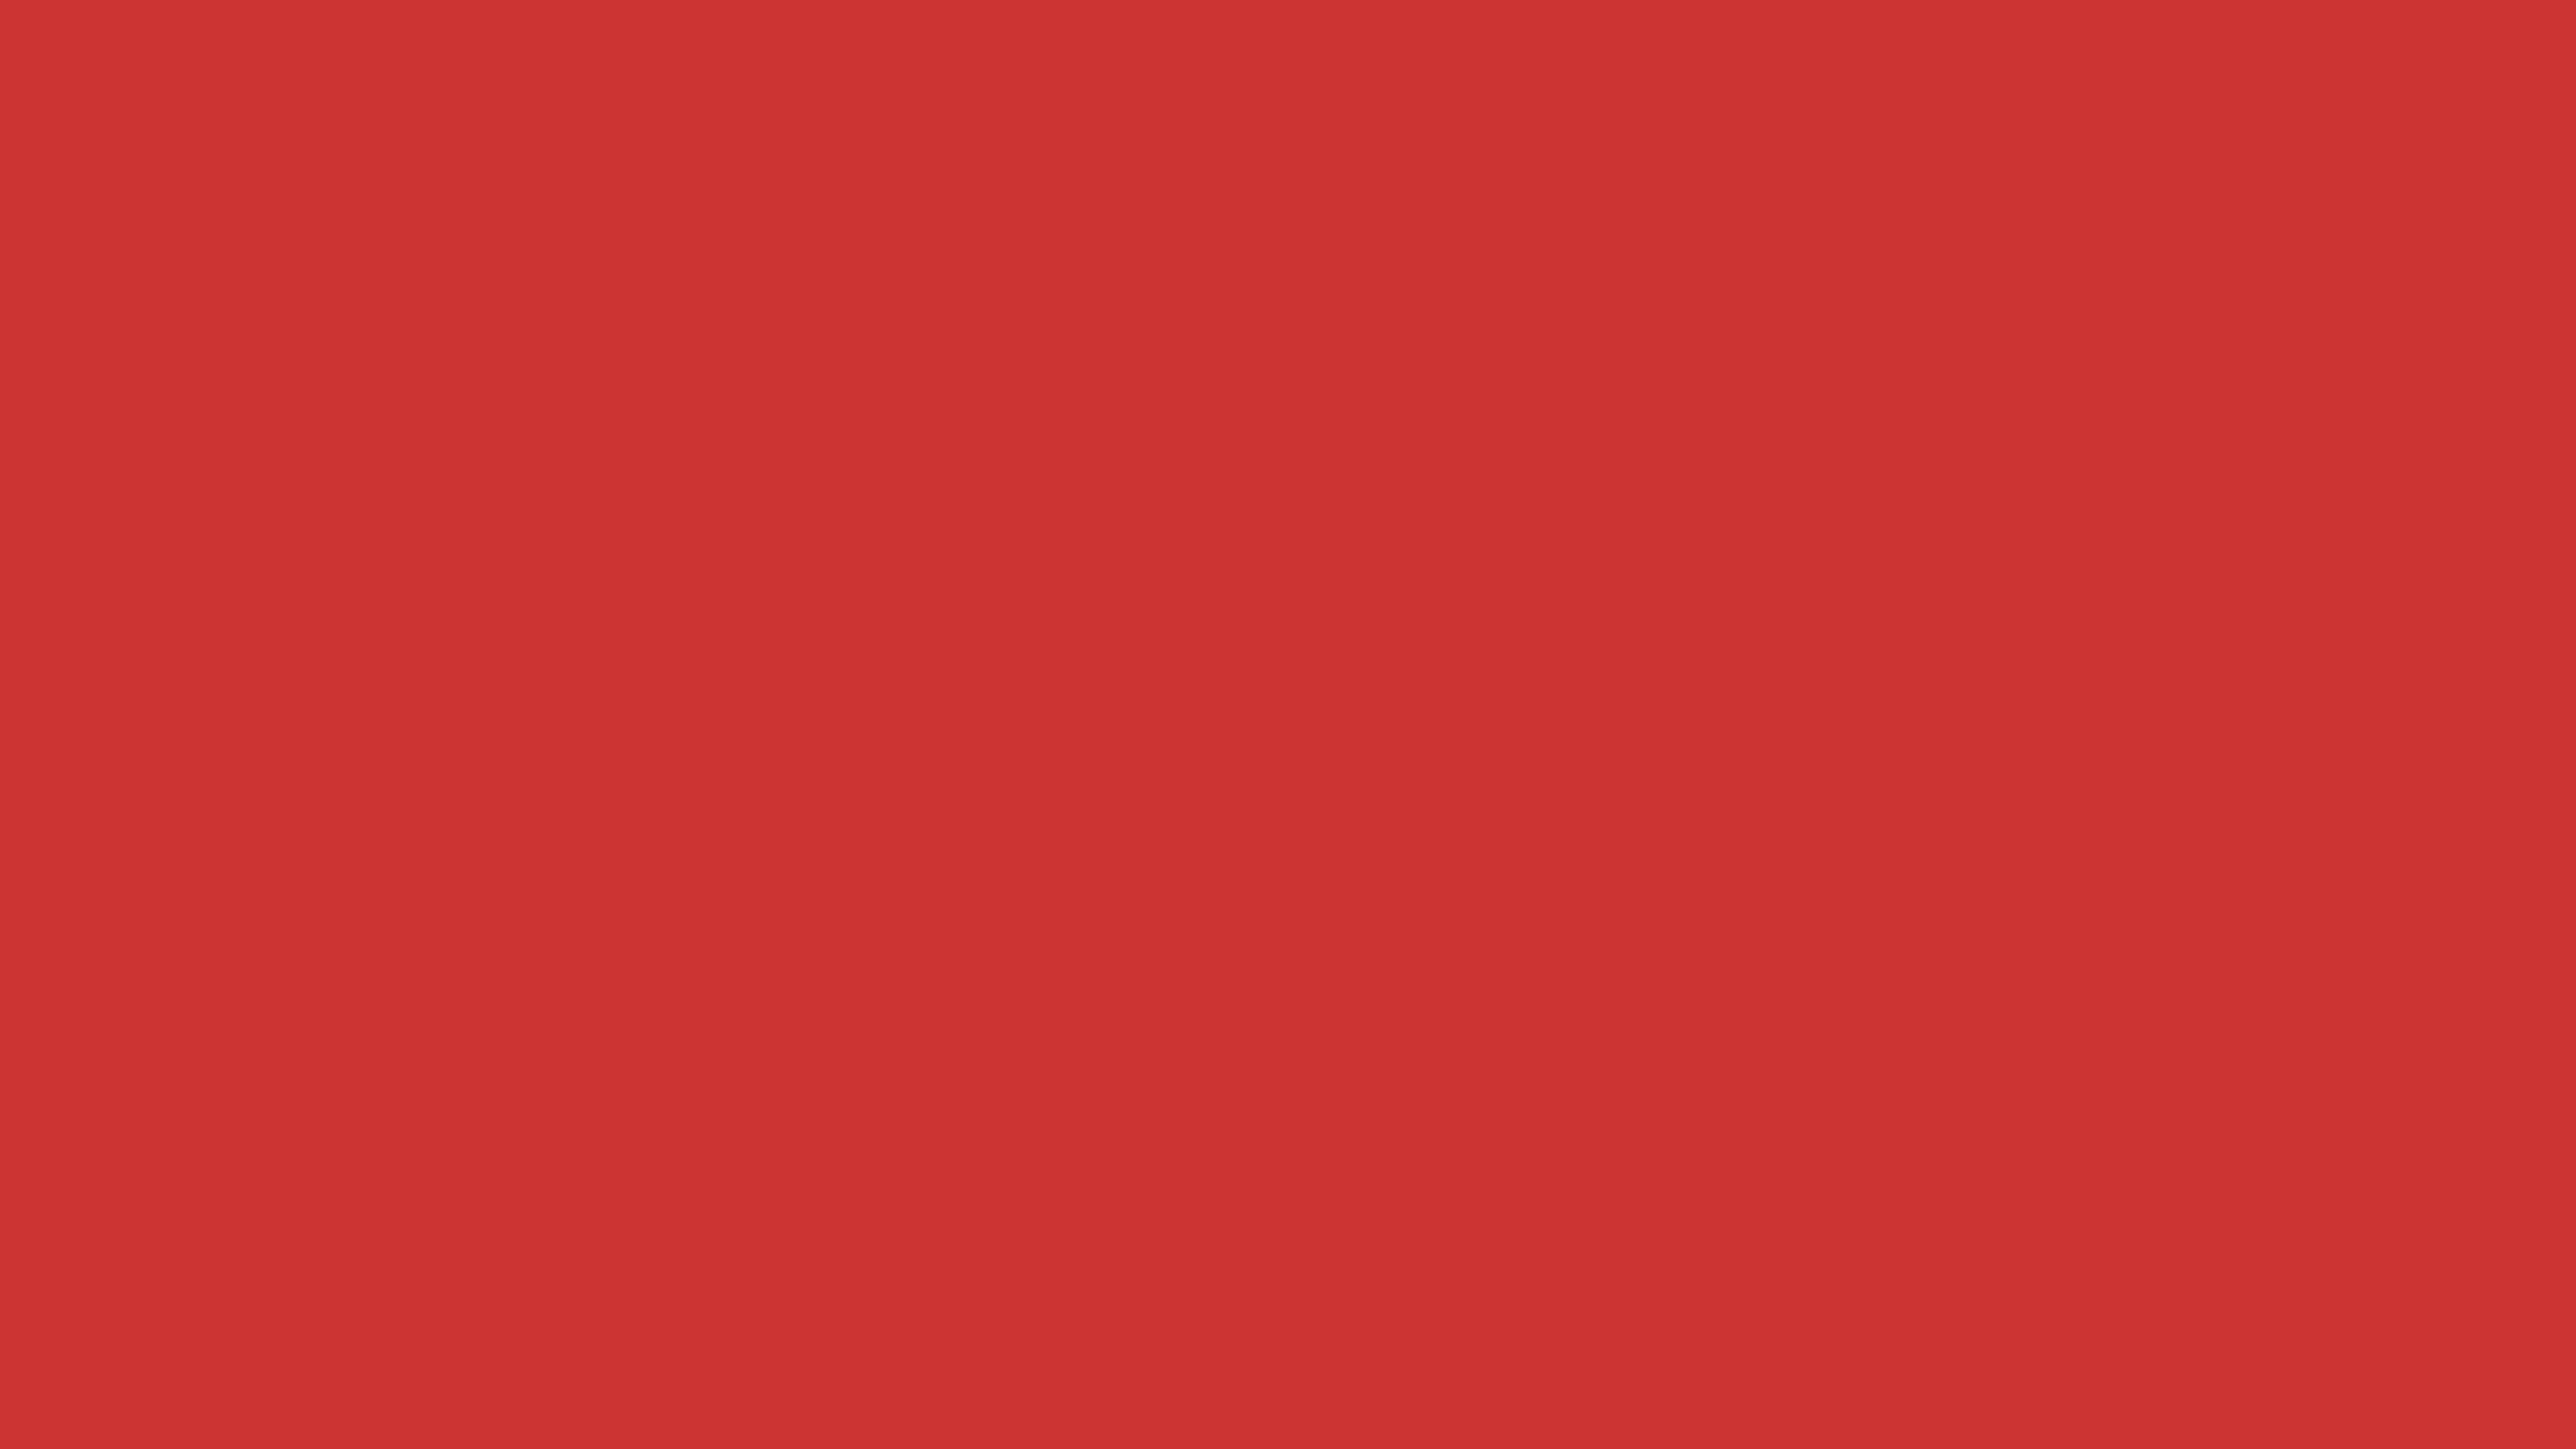 4096x2304 Persian Red Solid Color Background